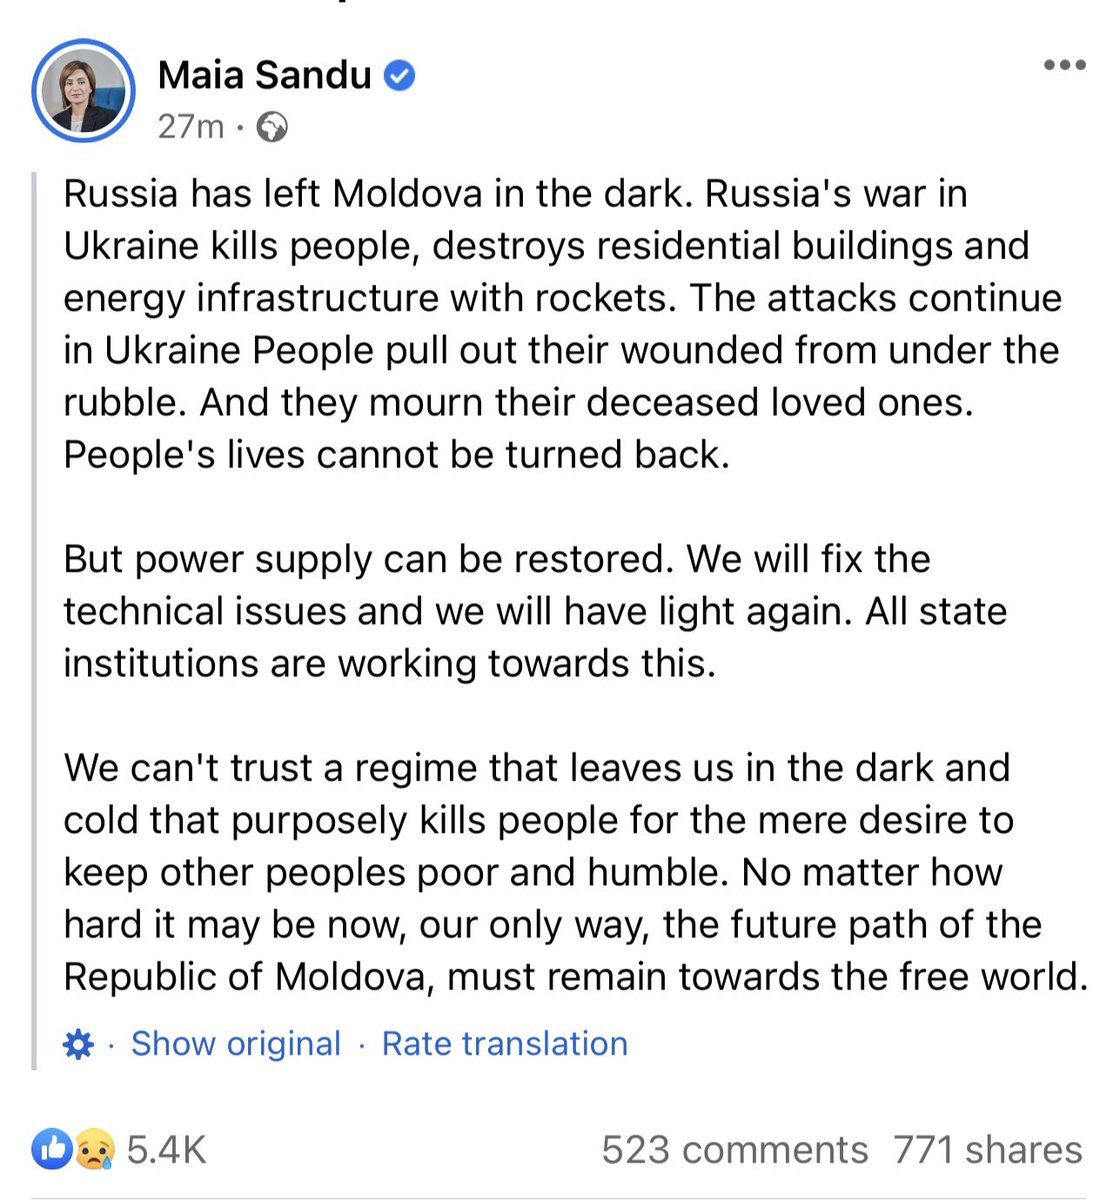 Moldova's president lashes out at Russia for the cruise missile attacks that knocked out her country's electricity networks